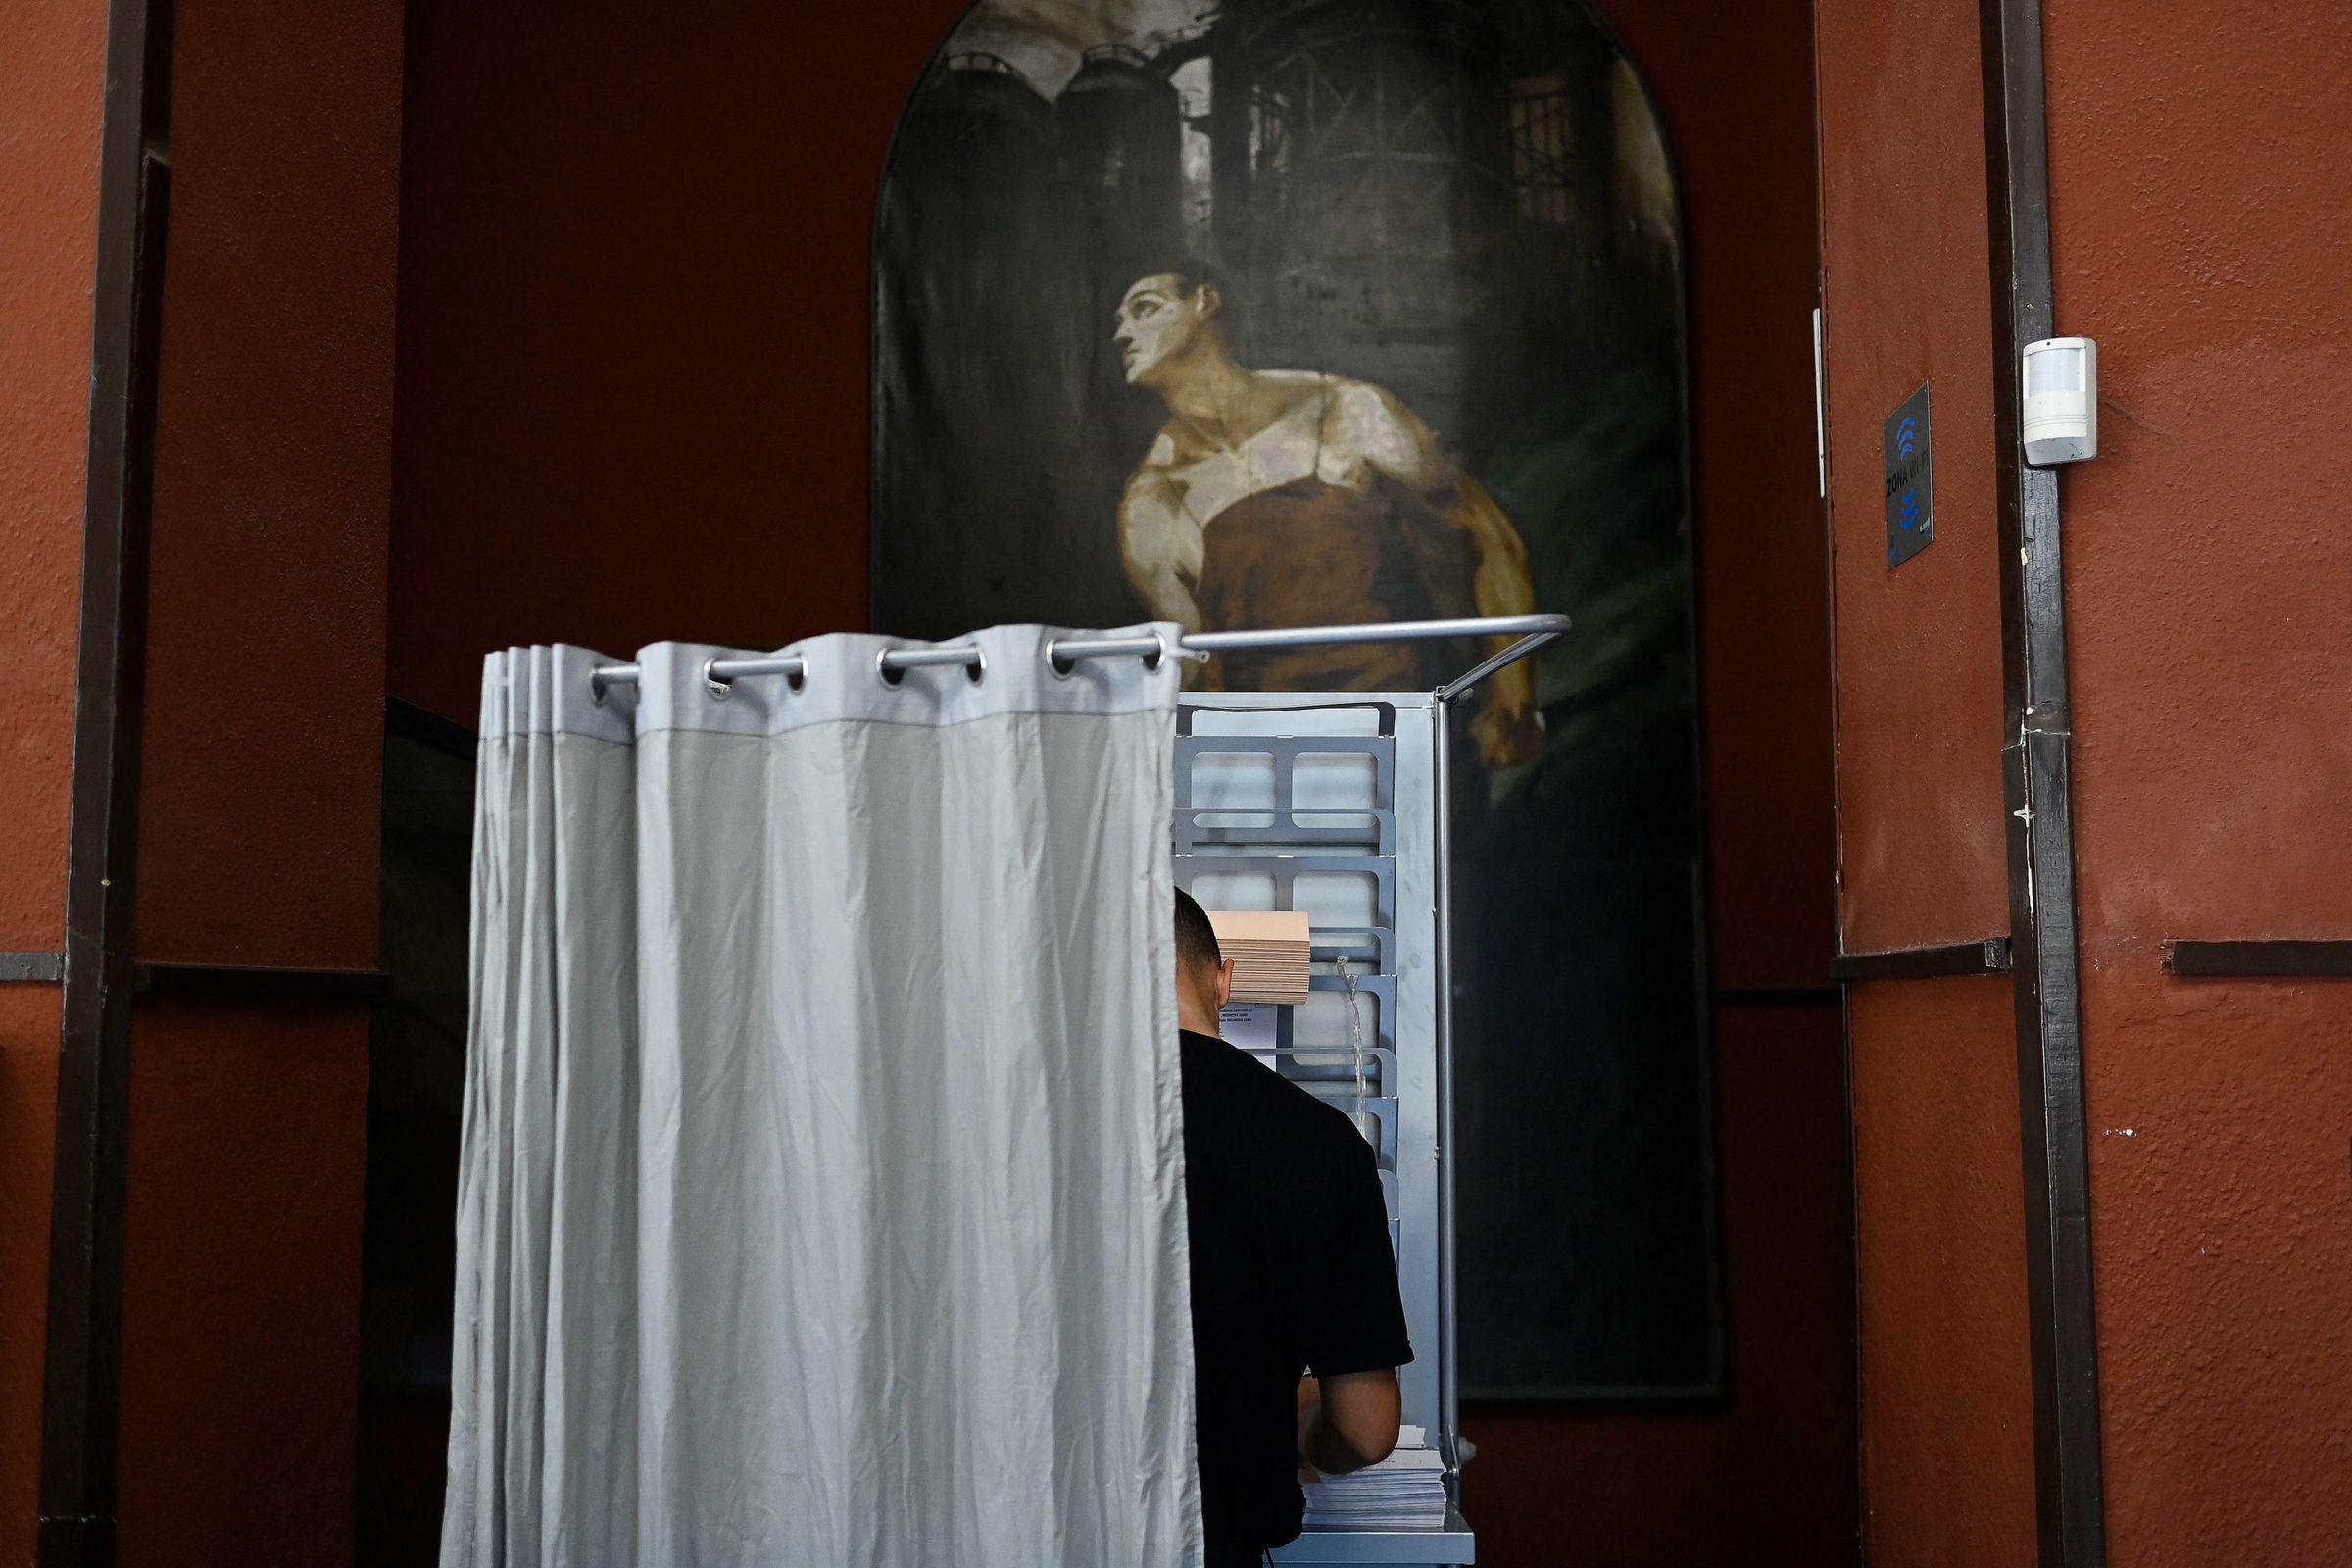 A person votes in a booth at the Rios Rosas polling station in Madrid during Spain’s general election on July 23rd, 2023.